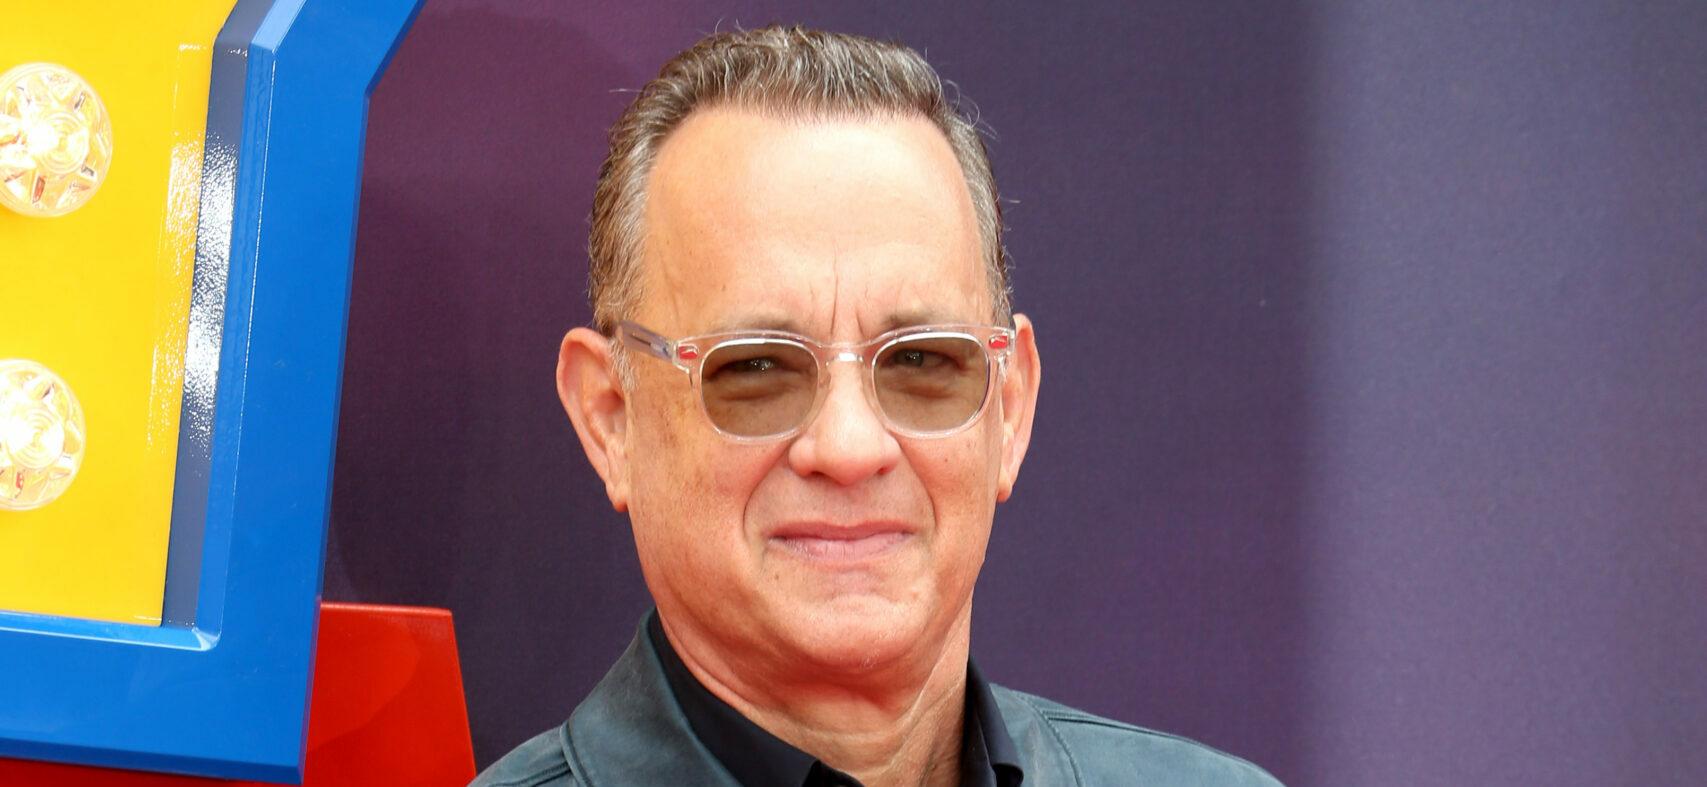 Tom Hanks Opens Up About Having ‘Self-Doubt’ Towards Performance In ‘Big Hit’ Films